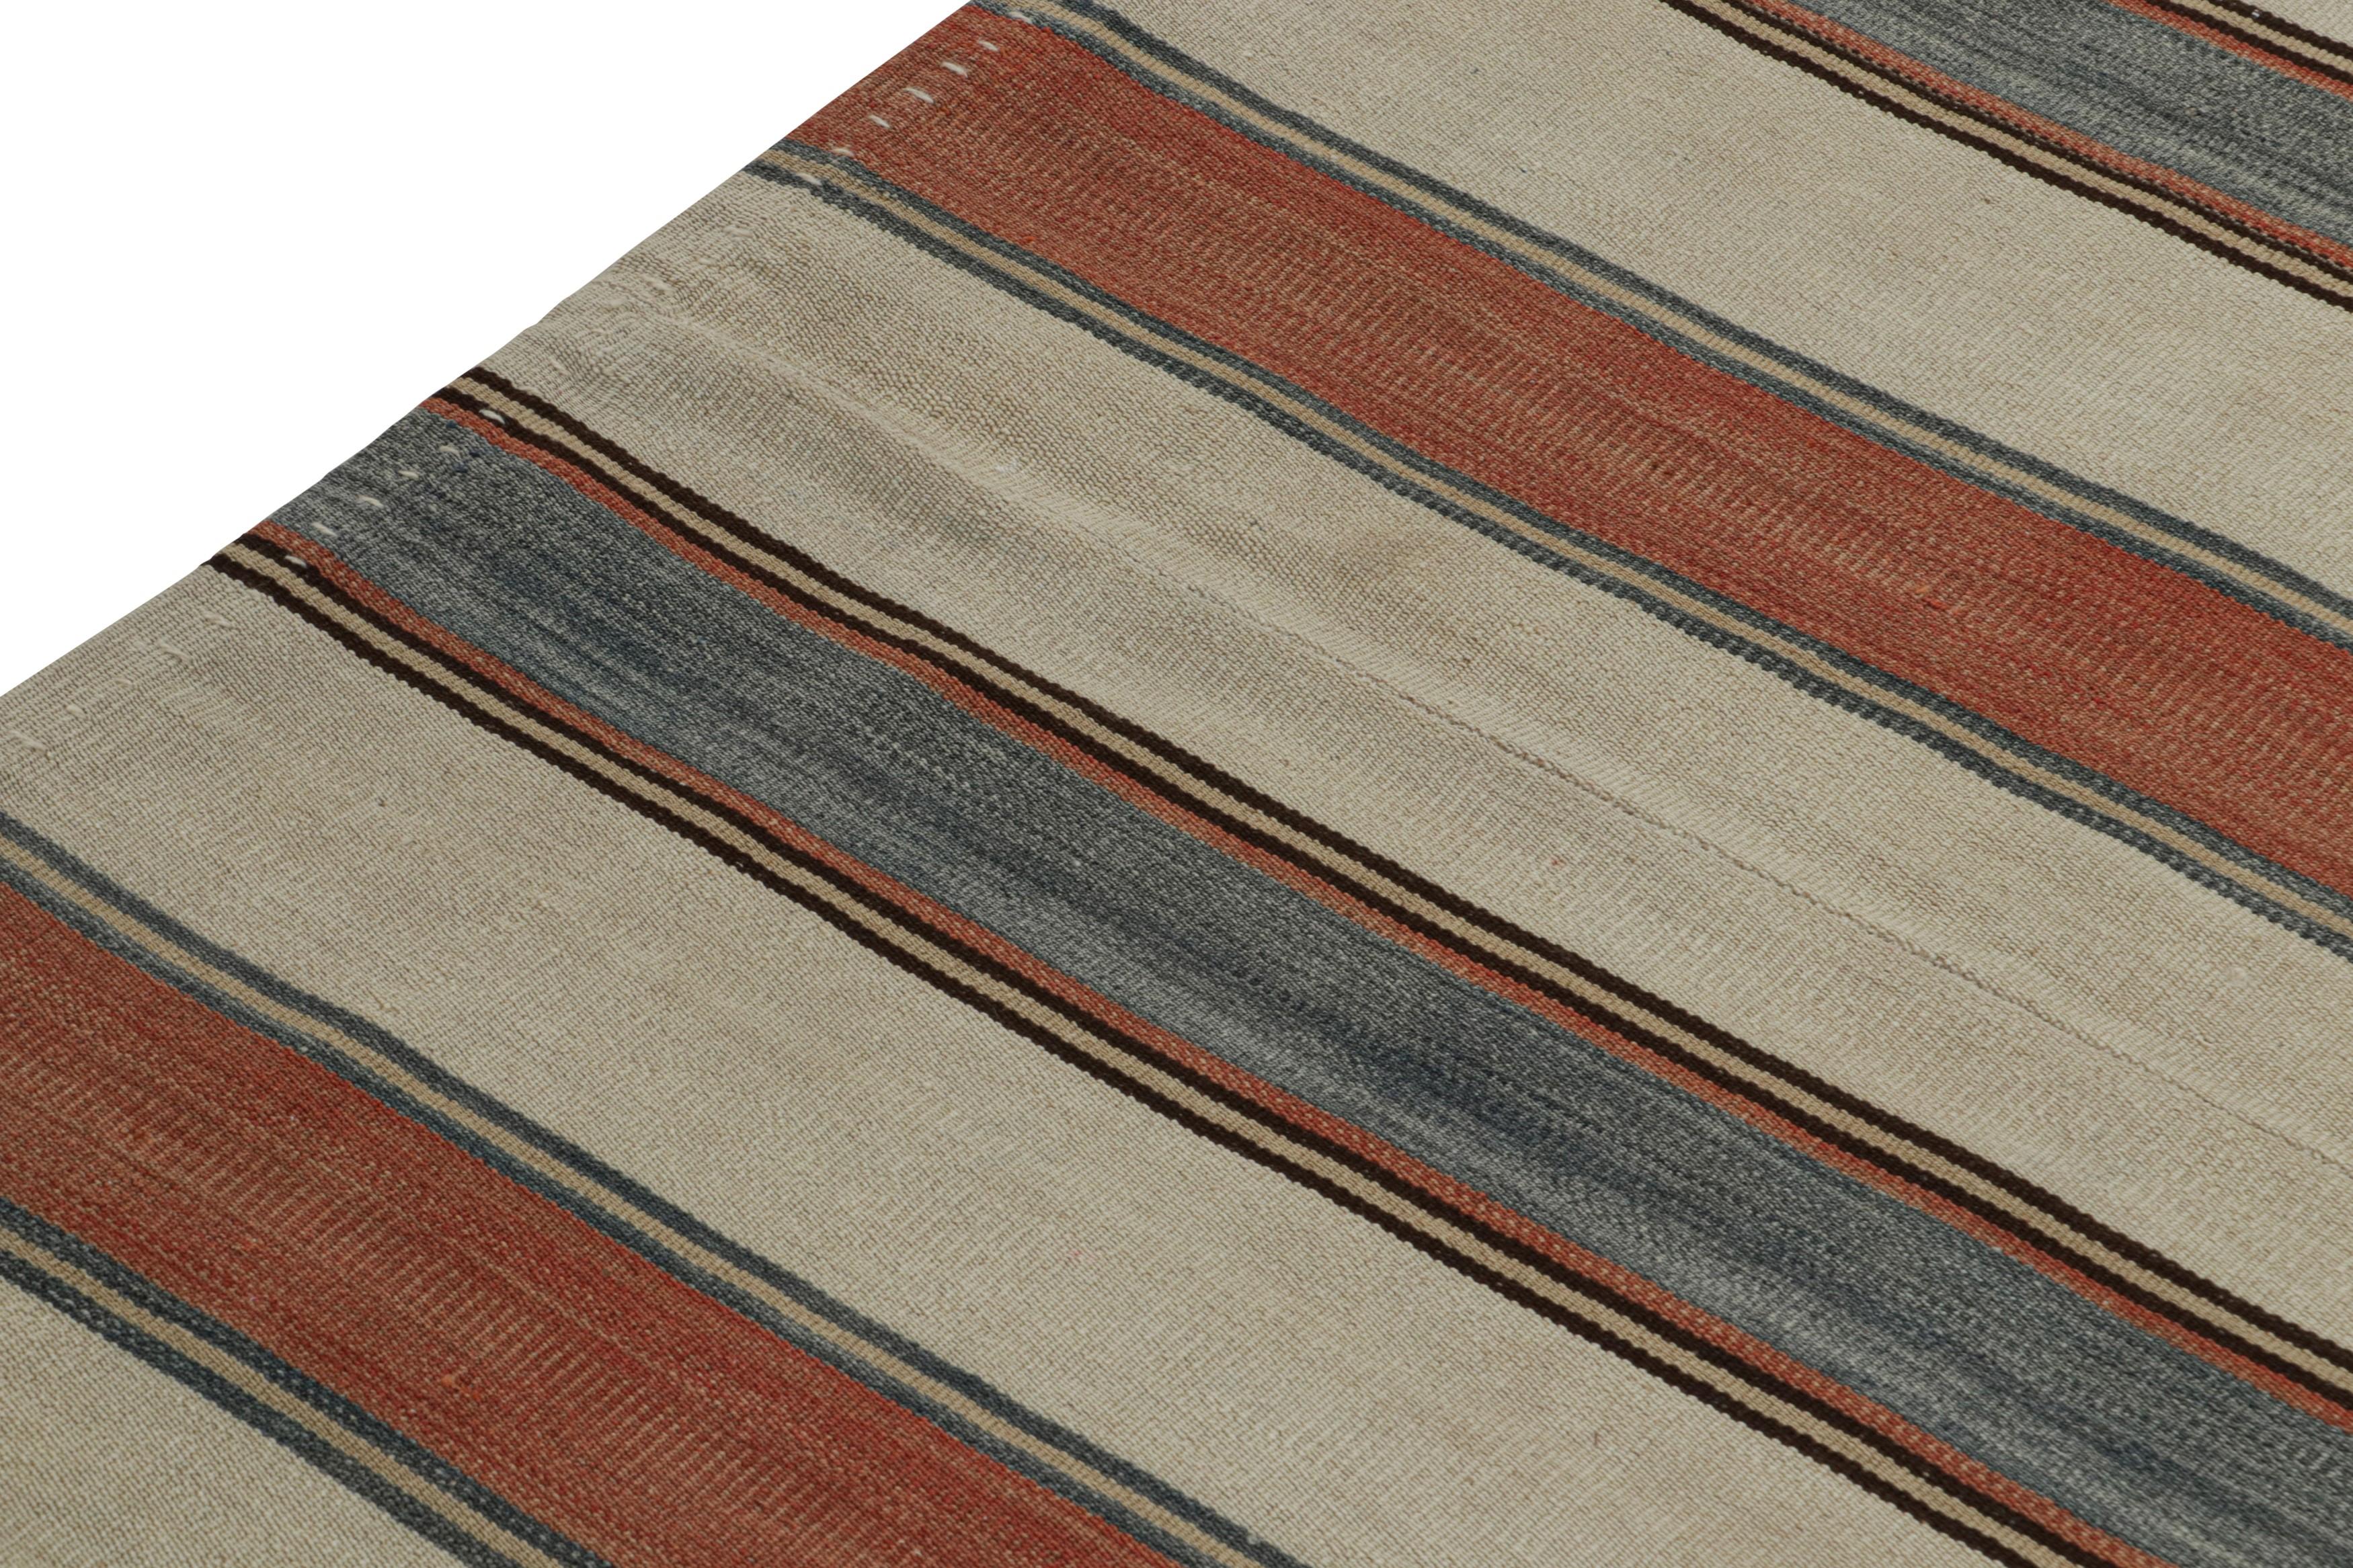 Vintage Afghani tribal Kilim rug, with Stripes, from Rug & Kilim In Good Condition For Sale In Long Island City, NY